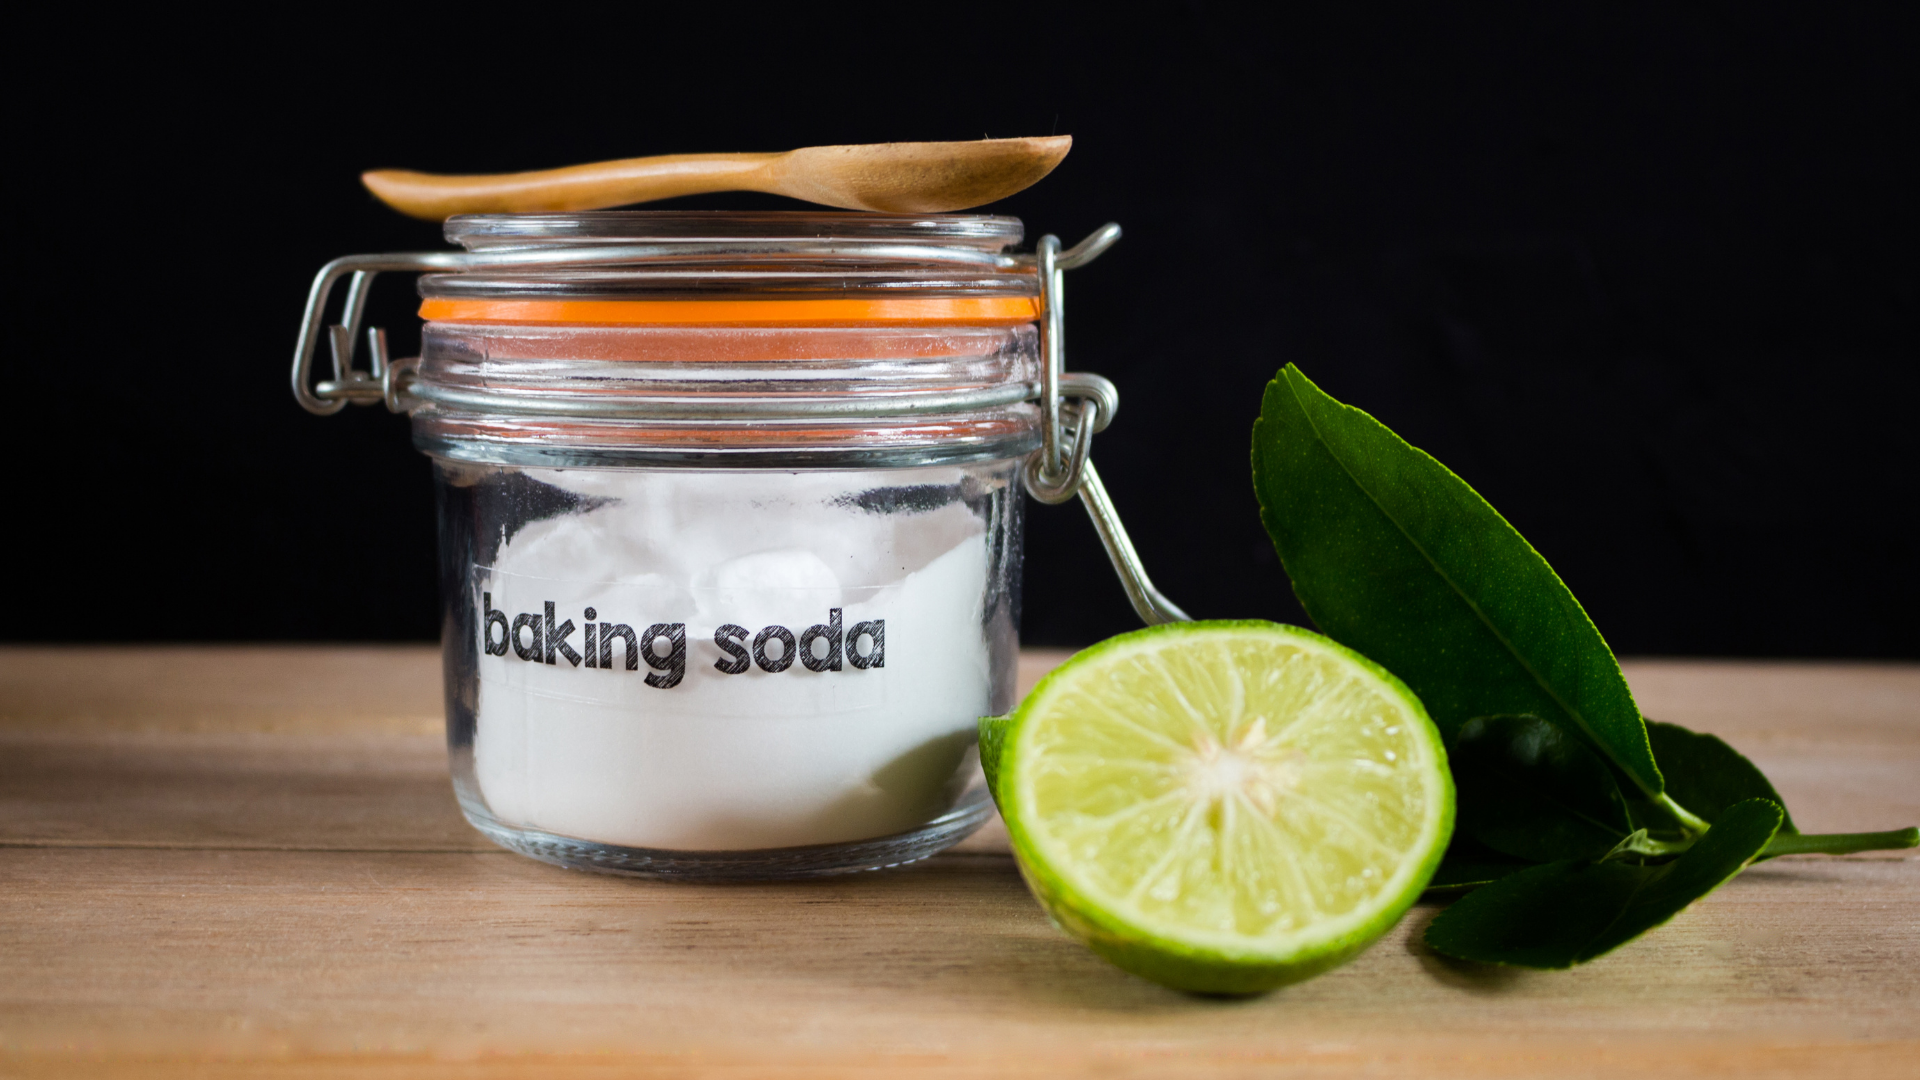 Baking soda is a multi-purpose cleaner, efficient in cleaning most surfaces.